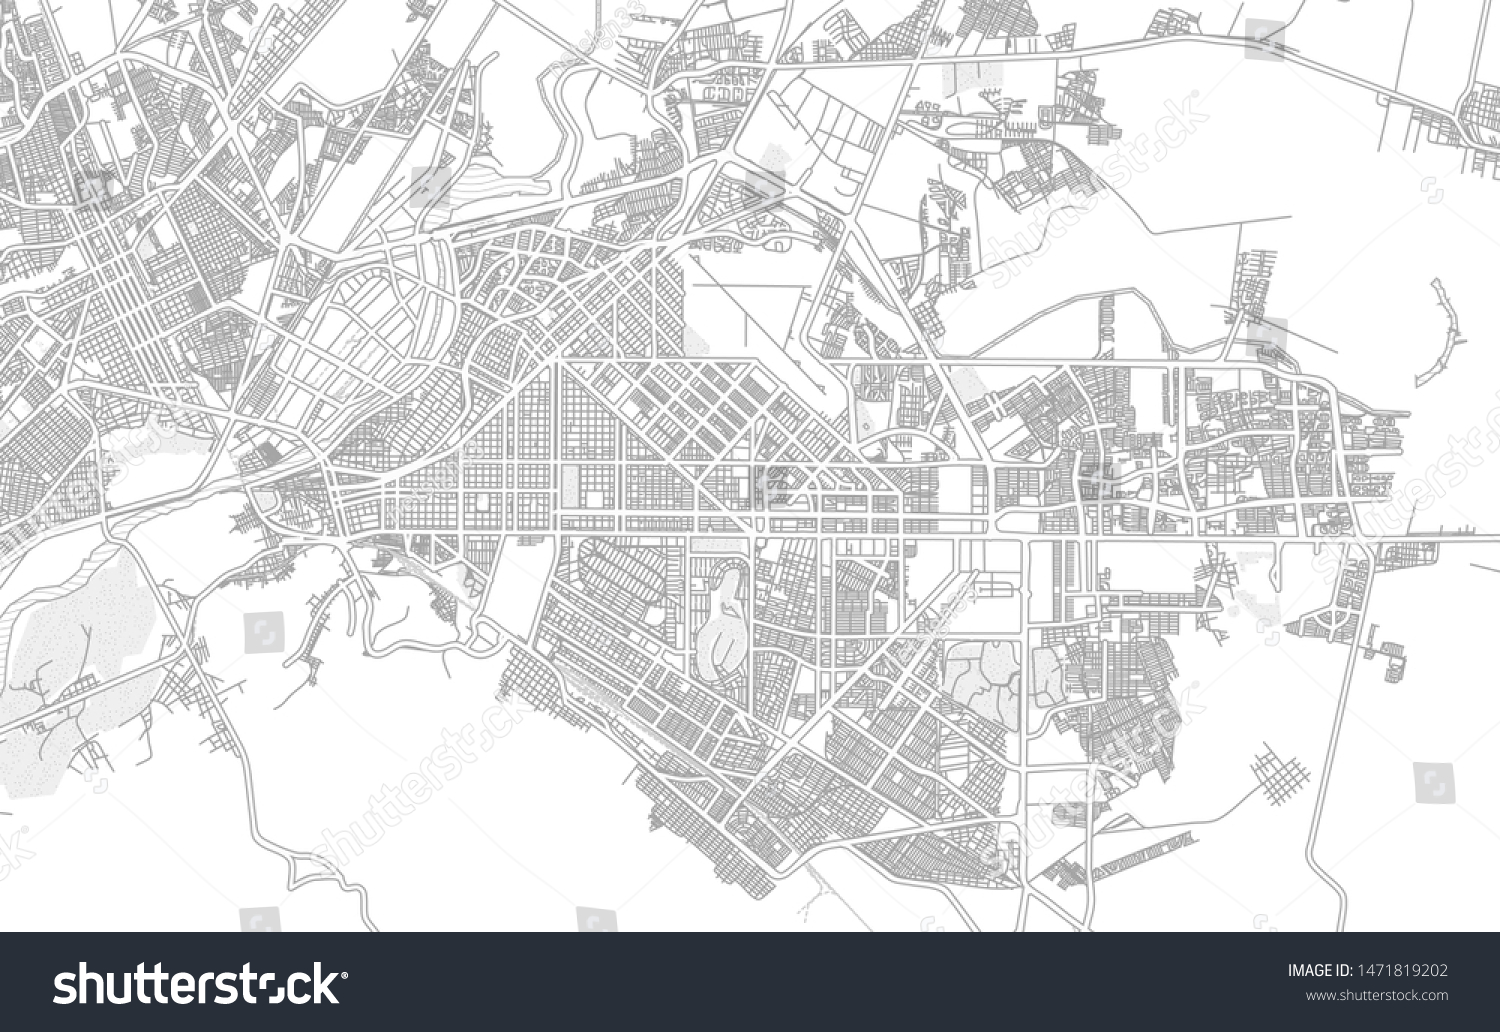 Coahuila Mexico Bright Outlined Vector Map Stock Vector Royalty